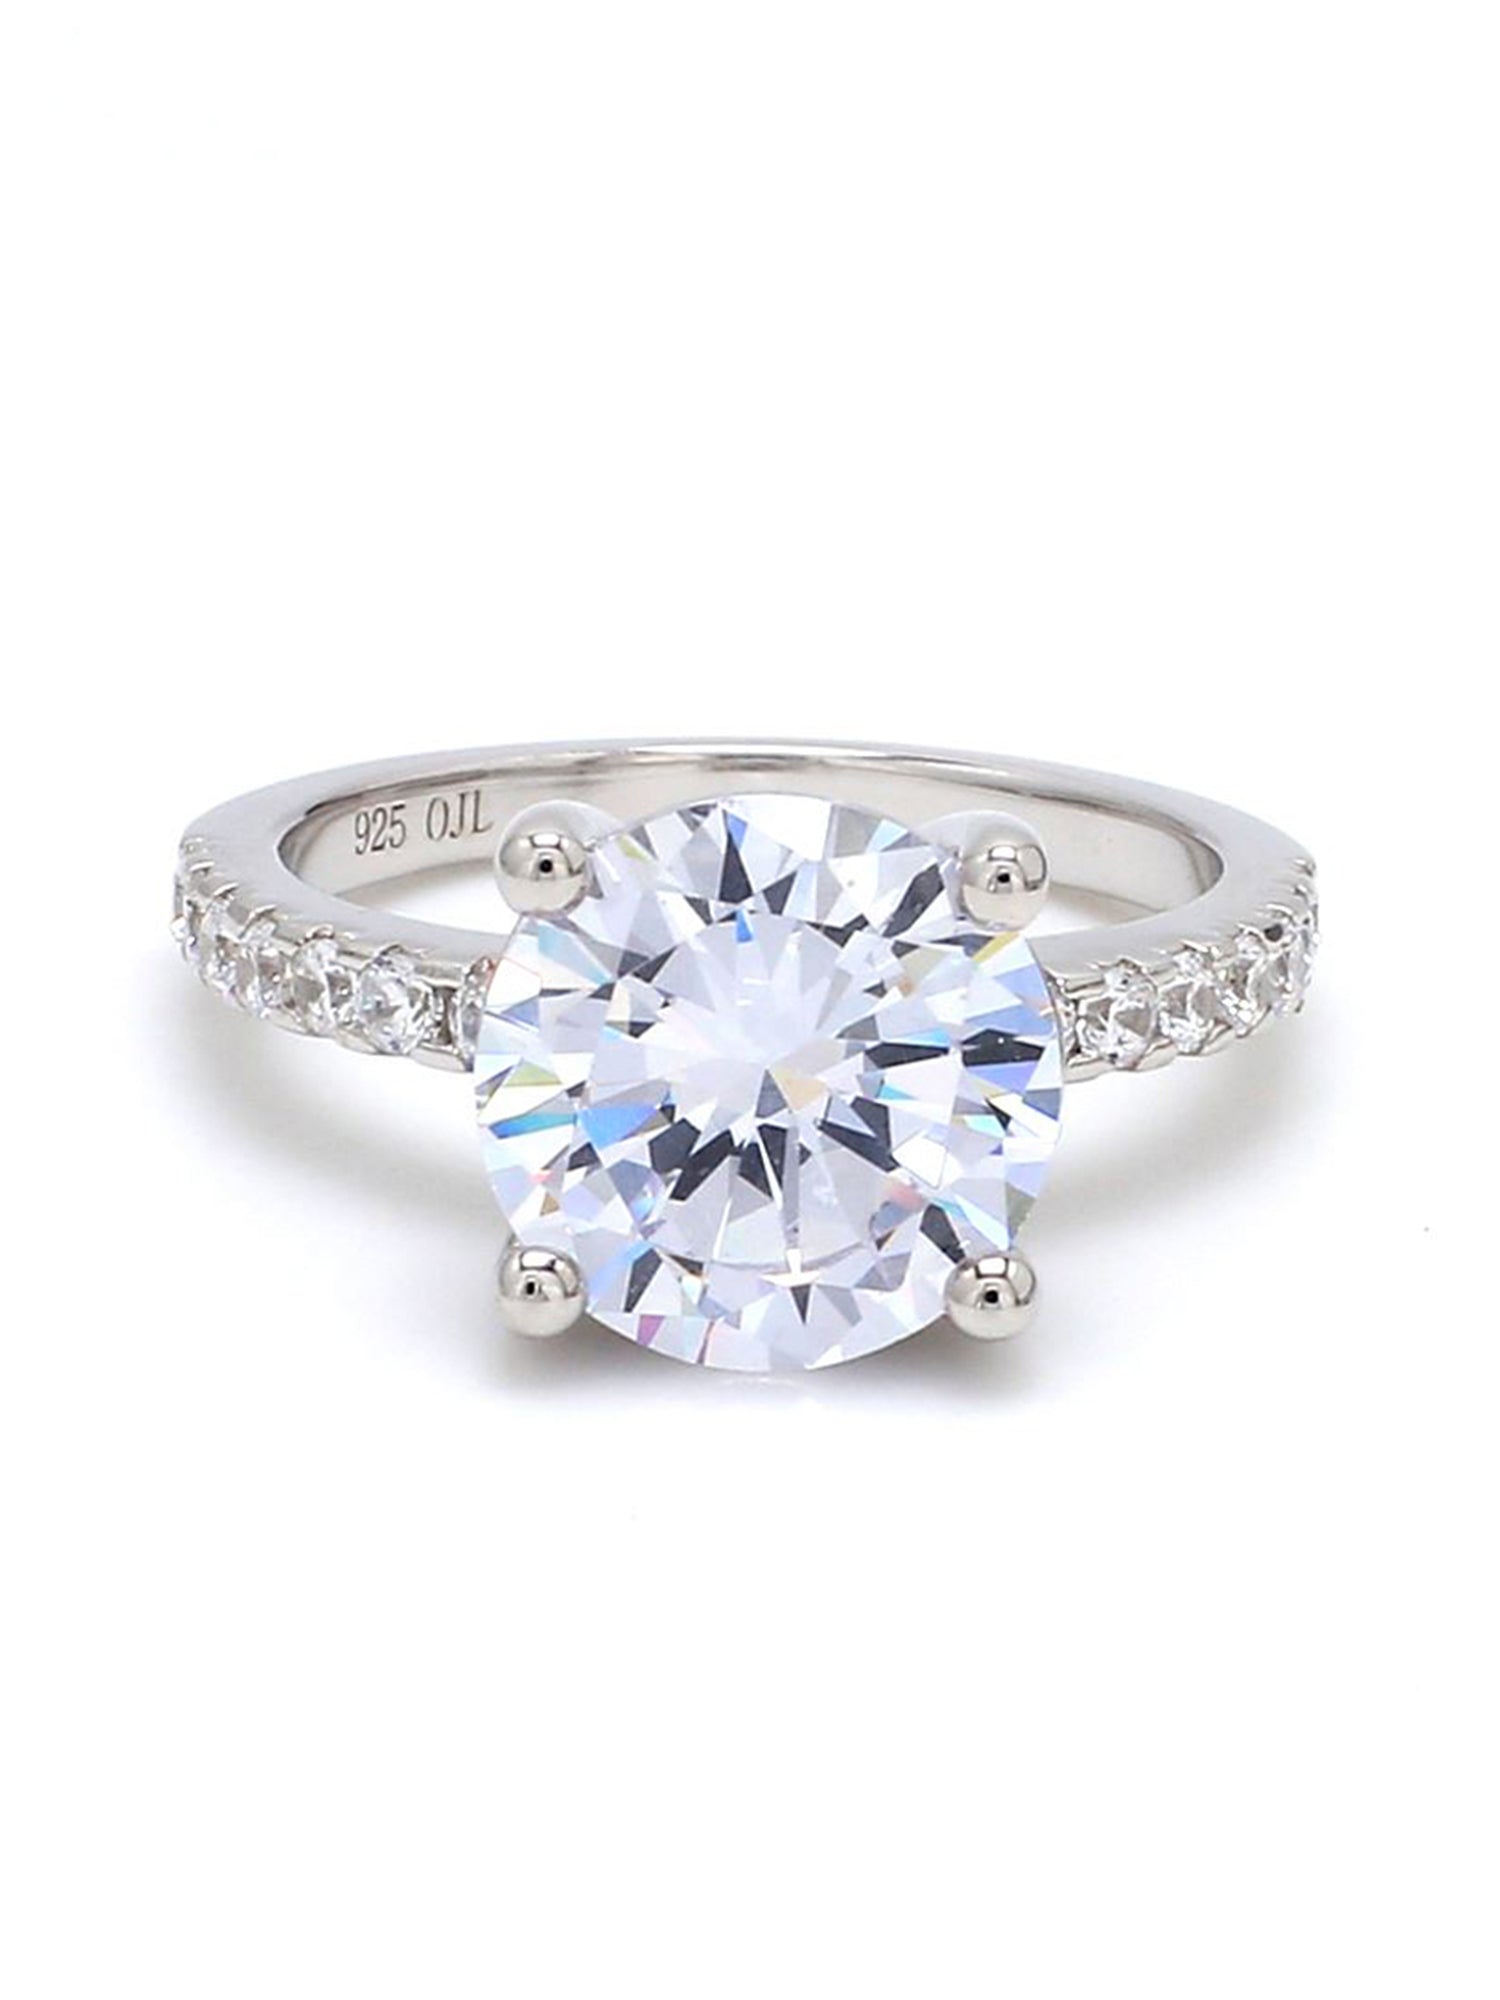 SOLITAIRE DIAMOND LOOK 925 SILVER RING